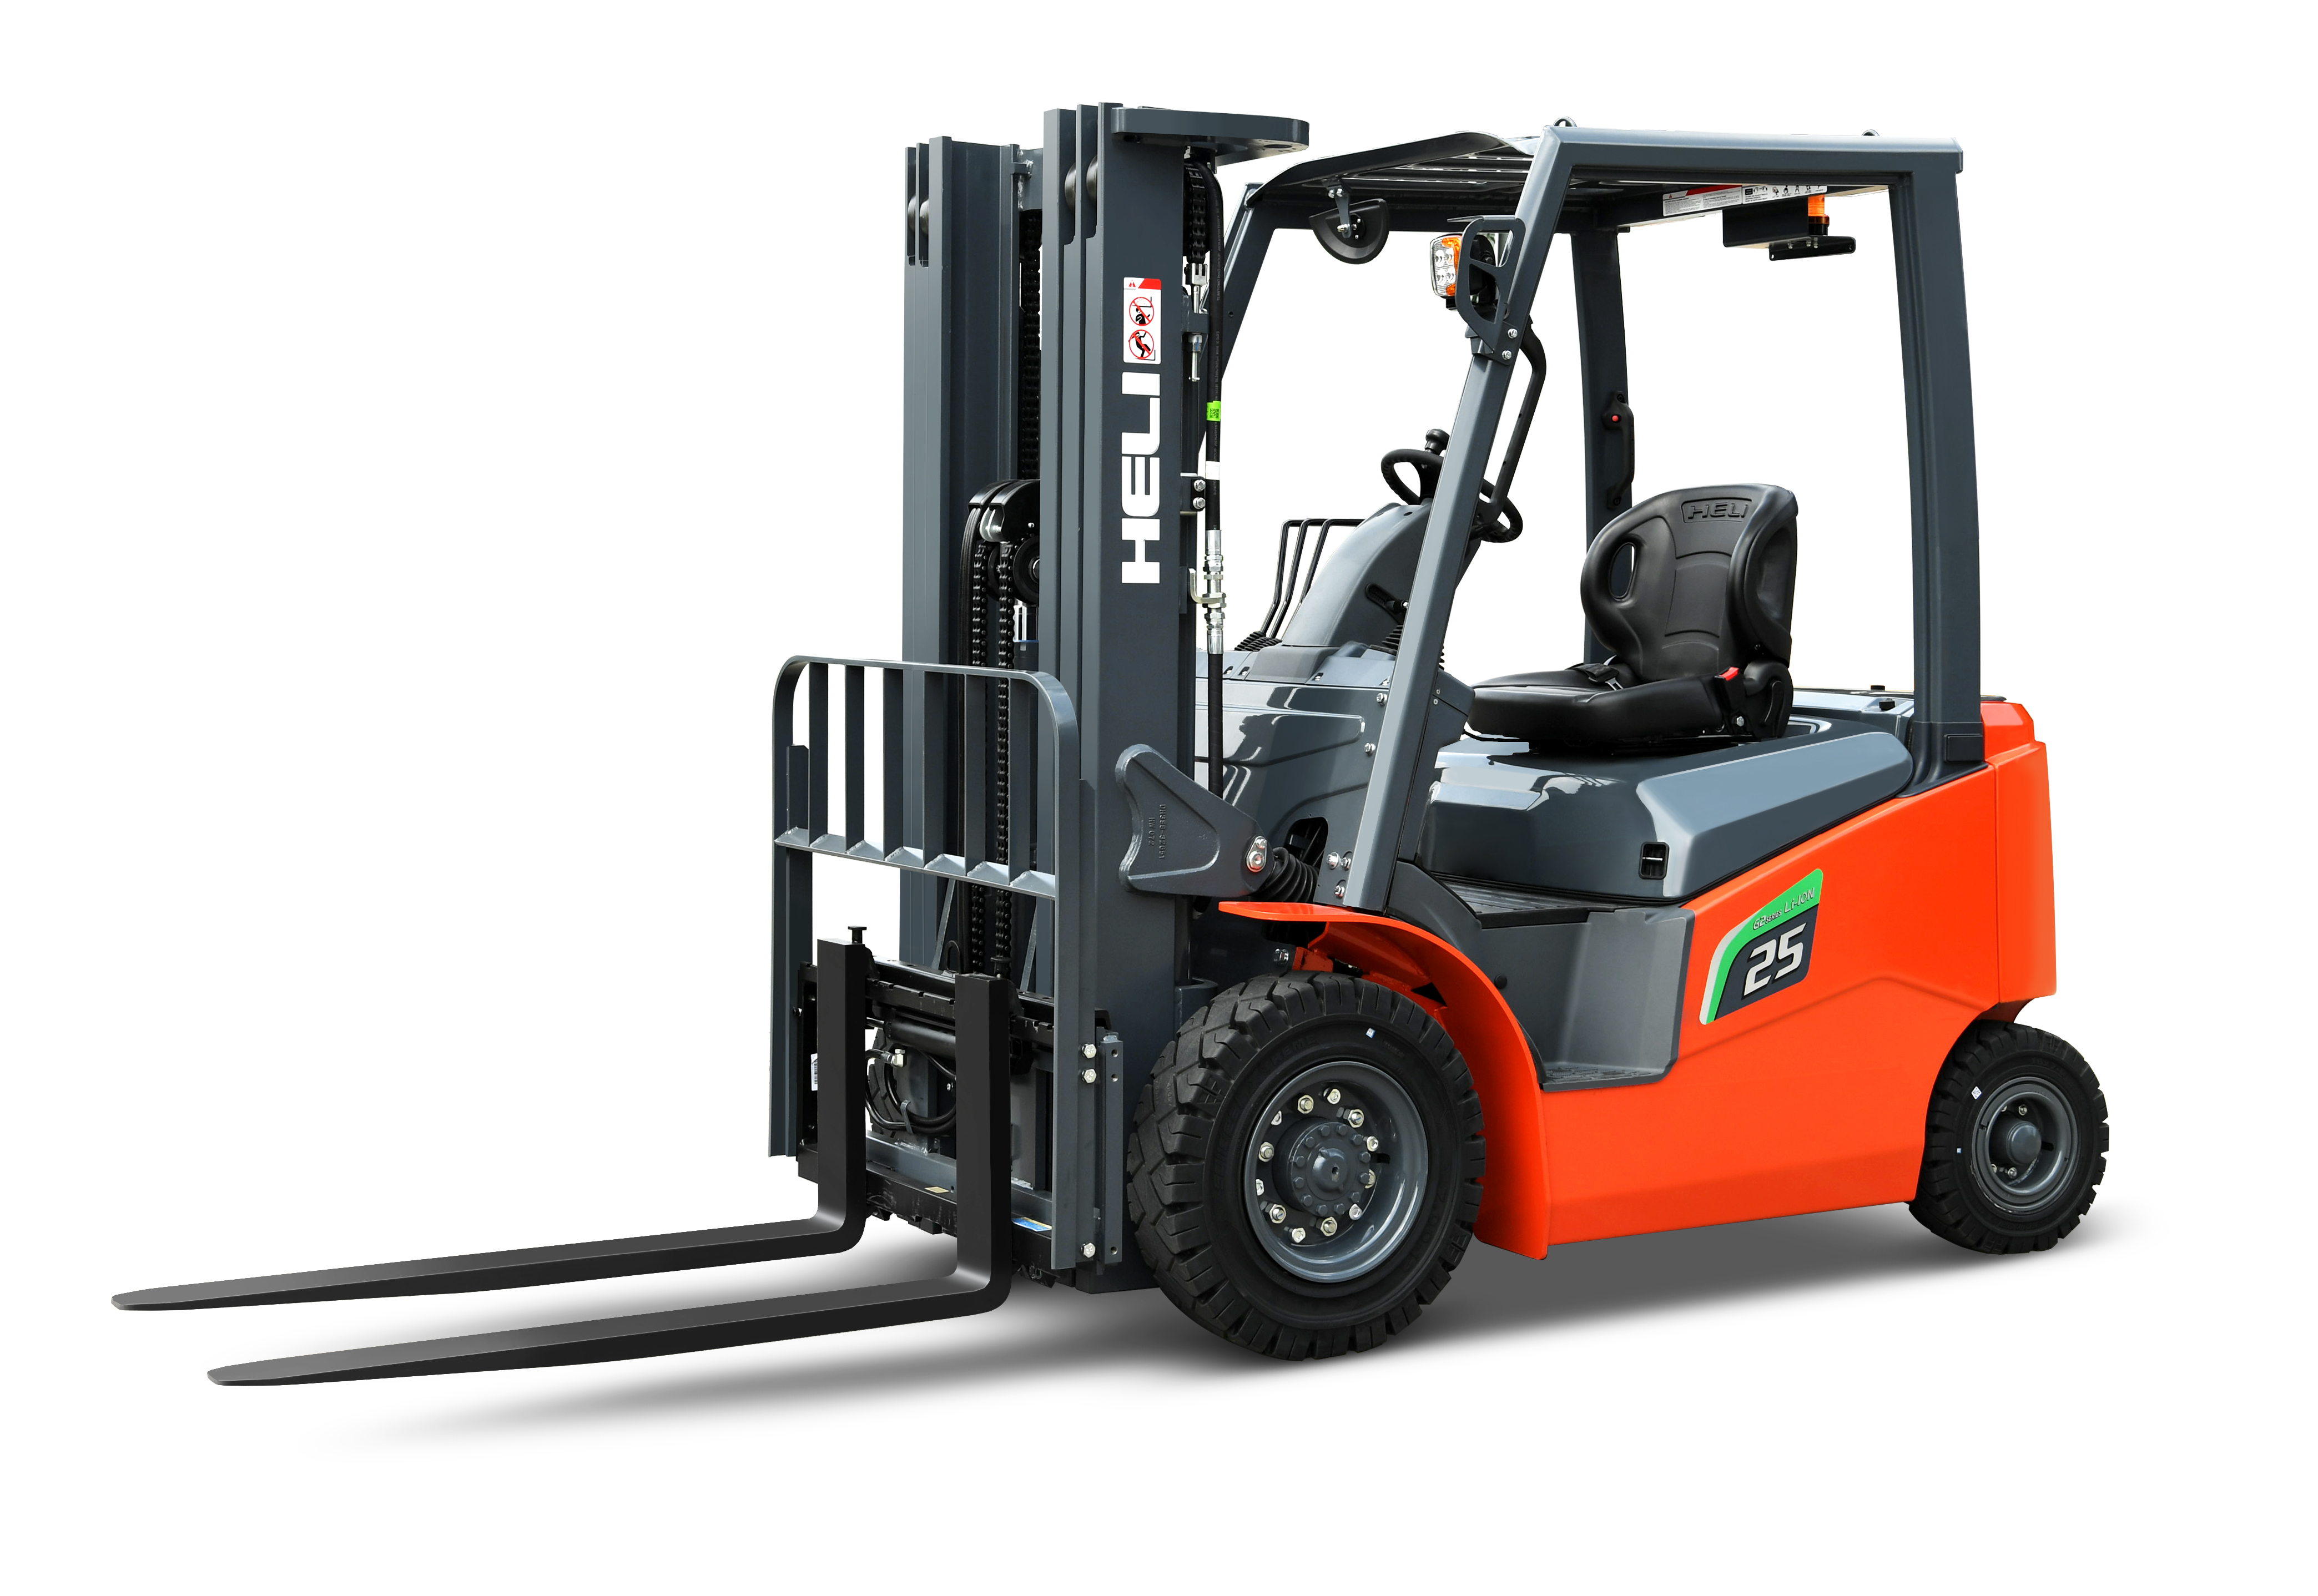 Heli G2 Series 4 wheel lithium battery electric forklifts